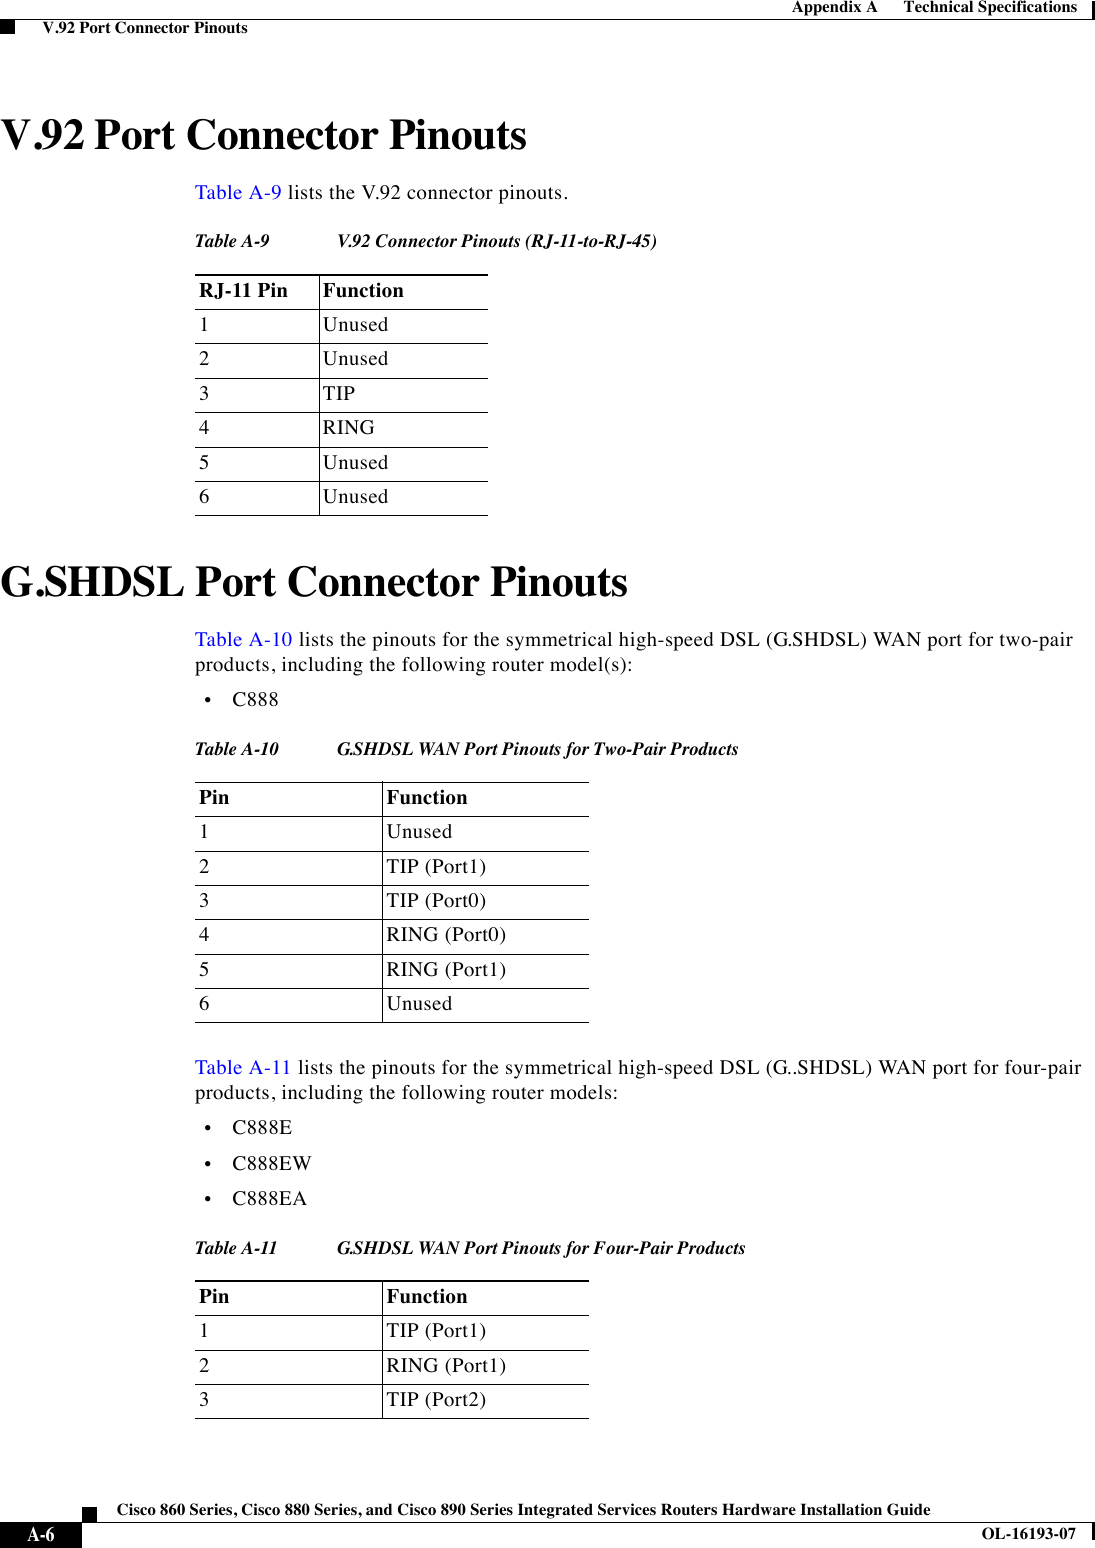  A-6Cisco 860 Series, Cisco 880 Series, and Cisco 890 Series Integrated Services Routers Hardware Installation GuideOL-16193-07Appendix A      Technical Specifications  V.92 Port Connector PinoutsV.92 Port Connector PinoutsTable A-9 lists the V.92 connector pinouts.G.SHDSL Port Connector PinoutsTable A-10 lists the pinouts for the symmetrical high-speed DSL (G.SHDSL) WAN port for two-pair products, including the following router model(s):  •C888Table A-11 lists the pinouts for the symmetrical high-speed DSL (G..SHDSL) WAN port for four-pair products, including the following router models:  •C888E  •C888EW  •C888EATabl e A-9 V.92 Connector Pinouts (RJ-11-to-RJ-45) RJ-11 Pin Function1Unused2Unused3TIP4RING5Unused6UnusedTabl e A-10 G.SHDSL WAN Port Pinouts for Two-Pair ProductsPin Function1Unused2TIP (Port1)3TIP (Port0)4RING (Port0)5RING (Port1)6UnusedTabl e A-11 G.SHDSL WAN Port Pinouts for Four-Pair ProductsPin Function1TIP (Port1)2RING (Port1)3TIP (Port2)